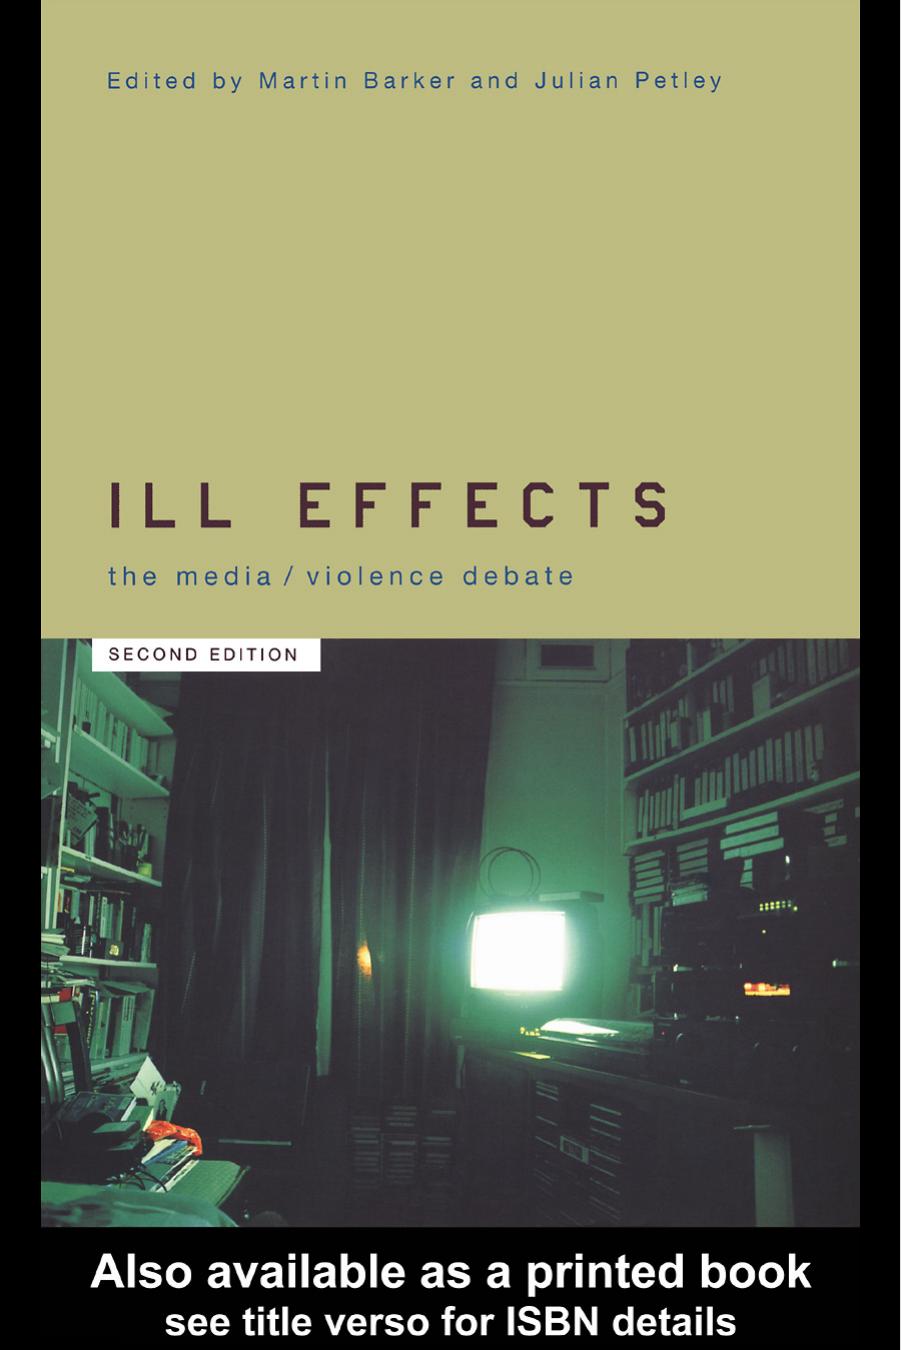 Ill Effects: The Media/Violence Debate, Second Edition